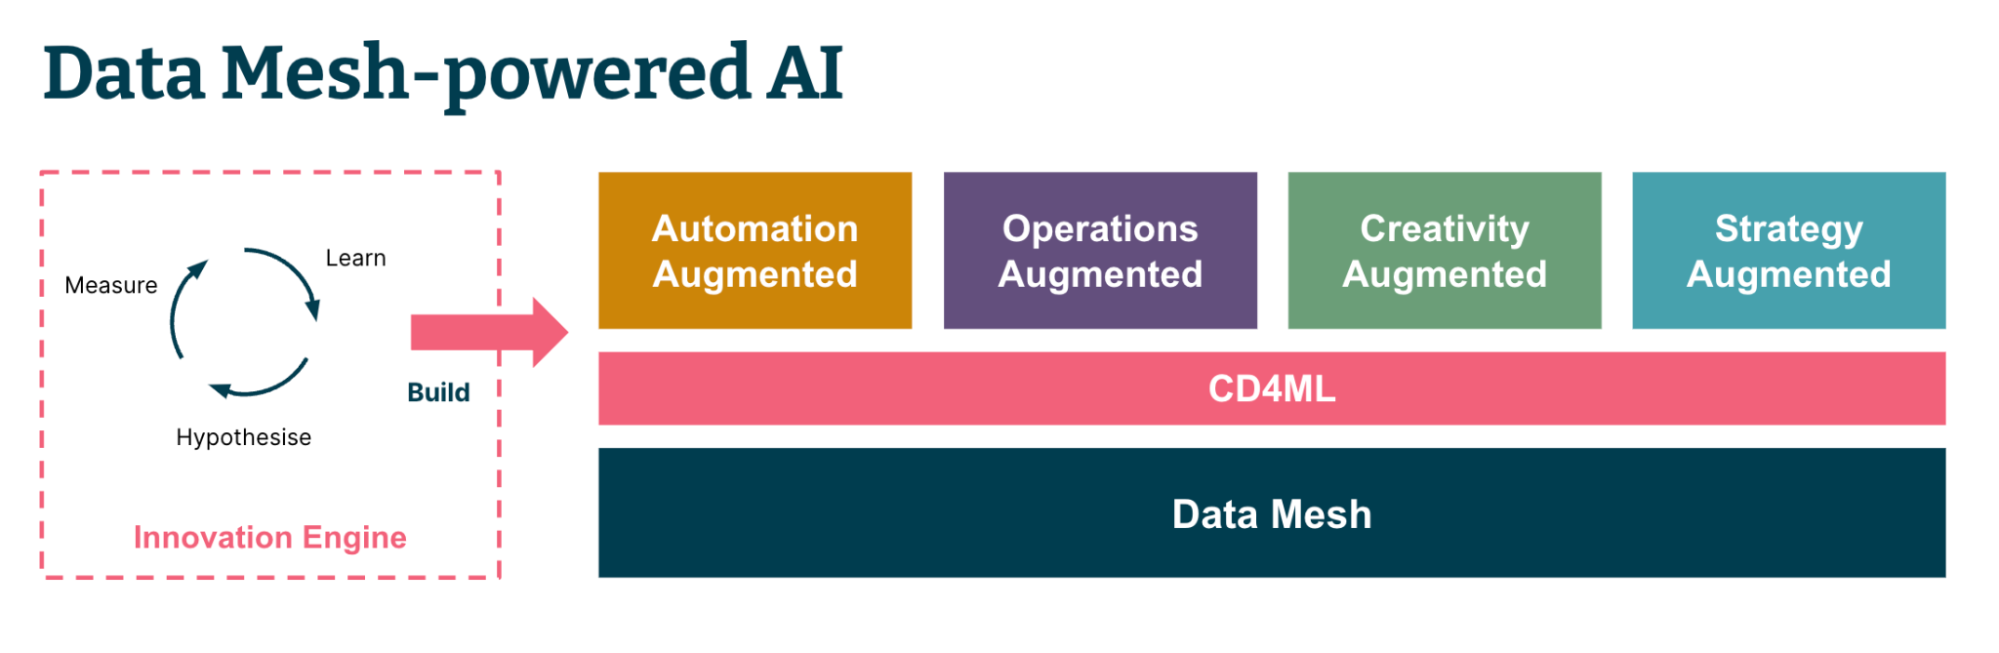 Diagram showing how AI: Augmented can be delivered at scale across an organization using Data Mesh.